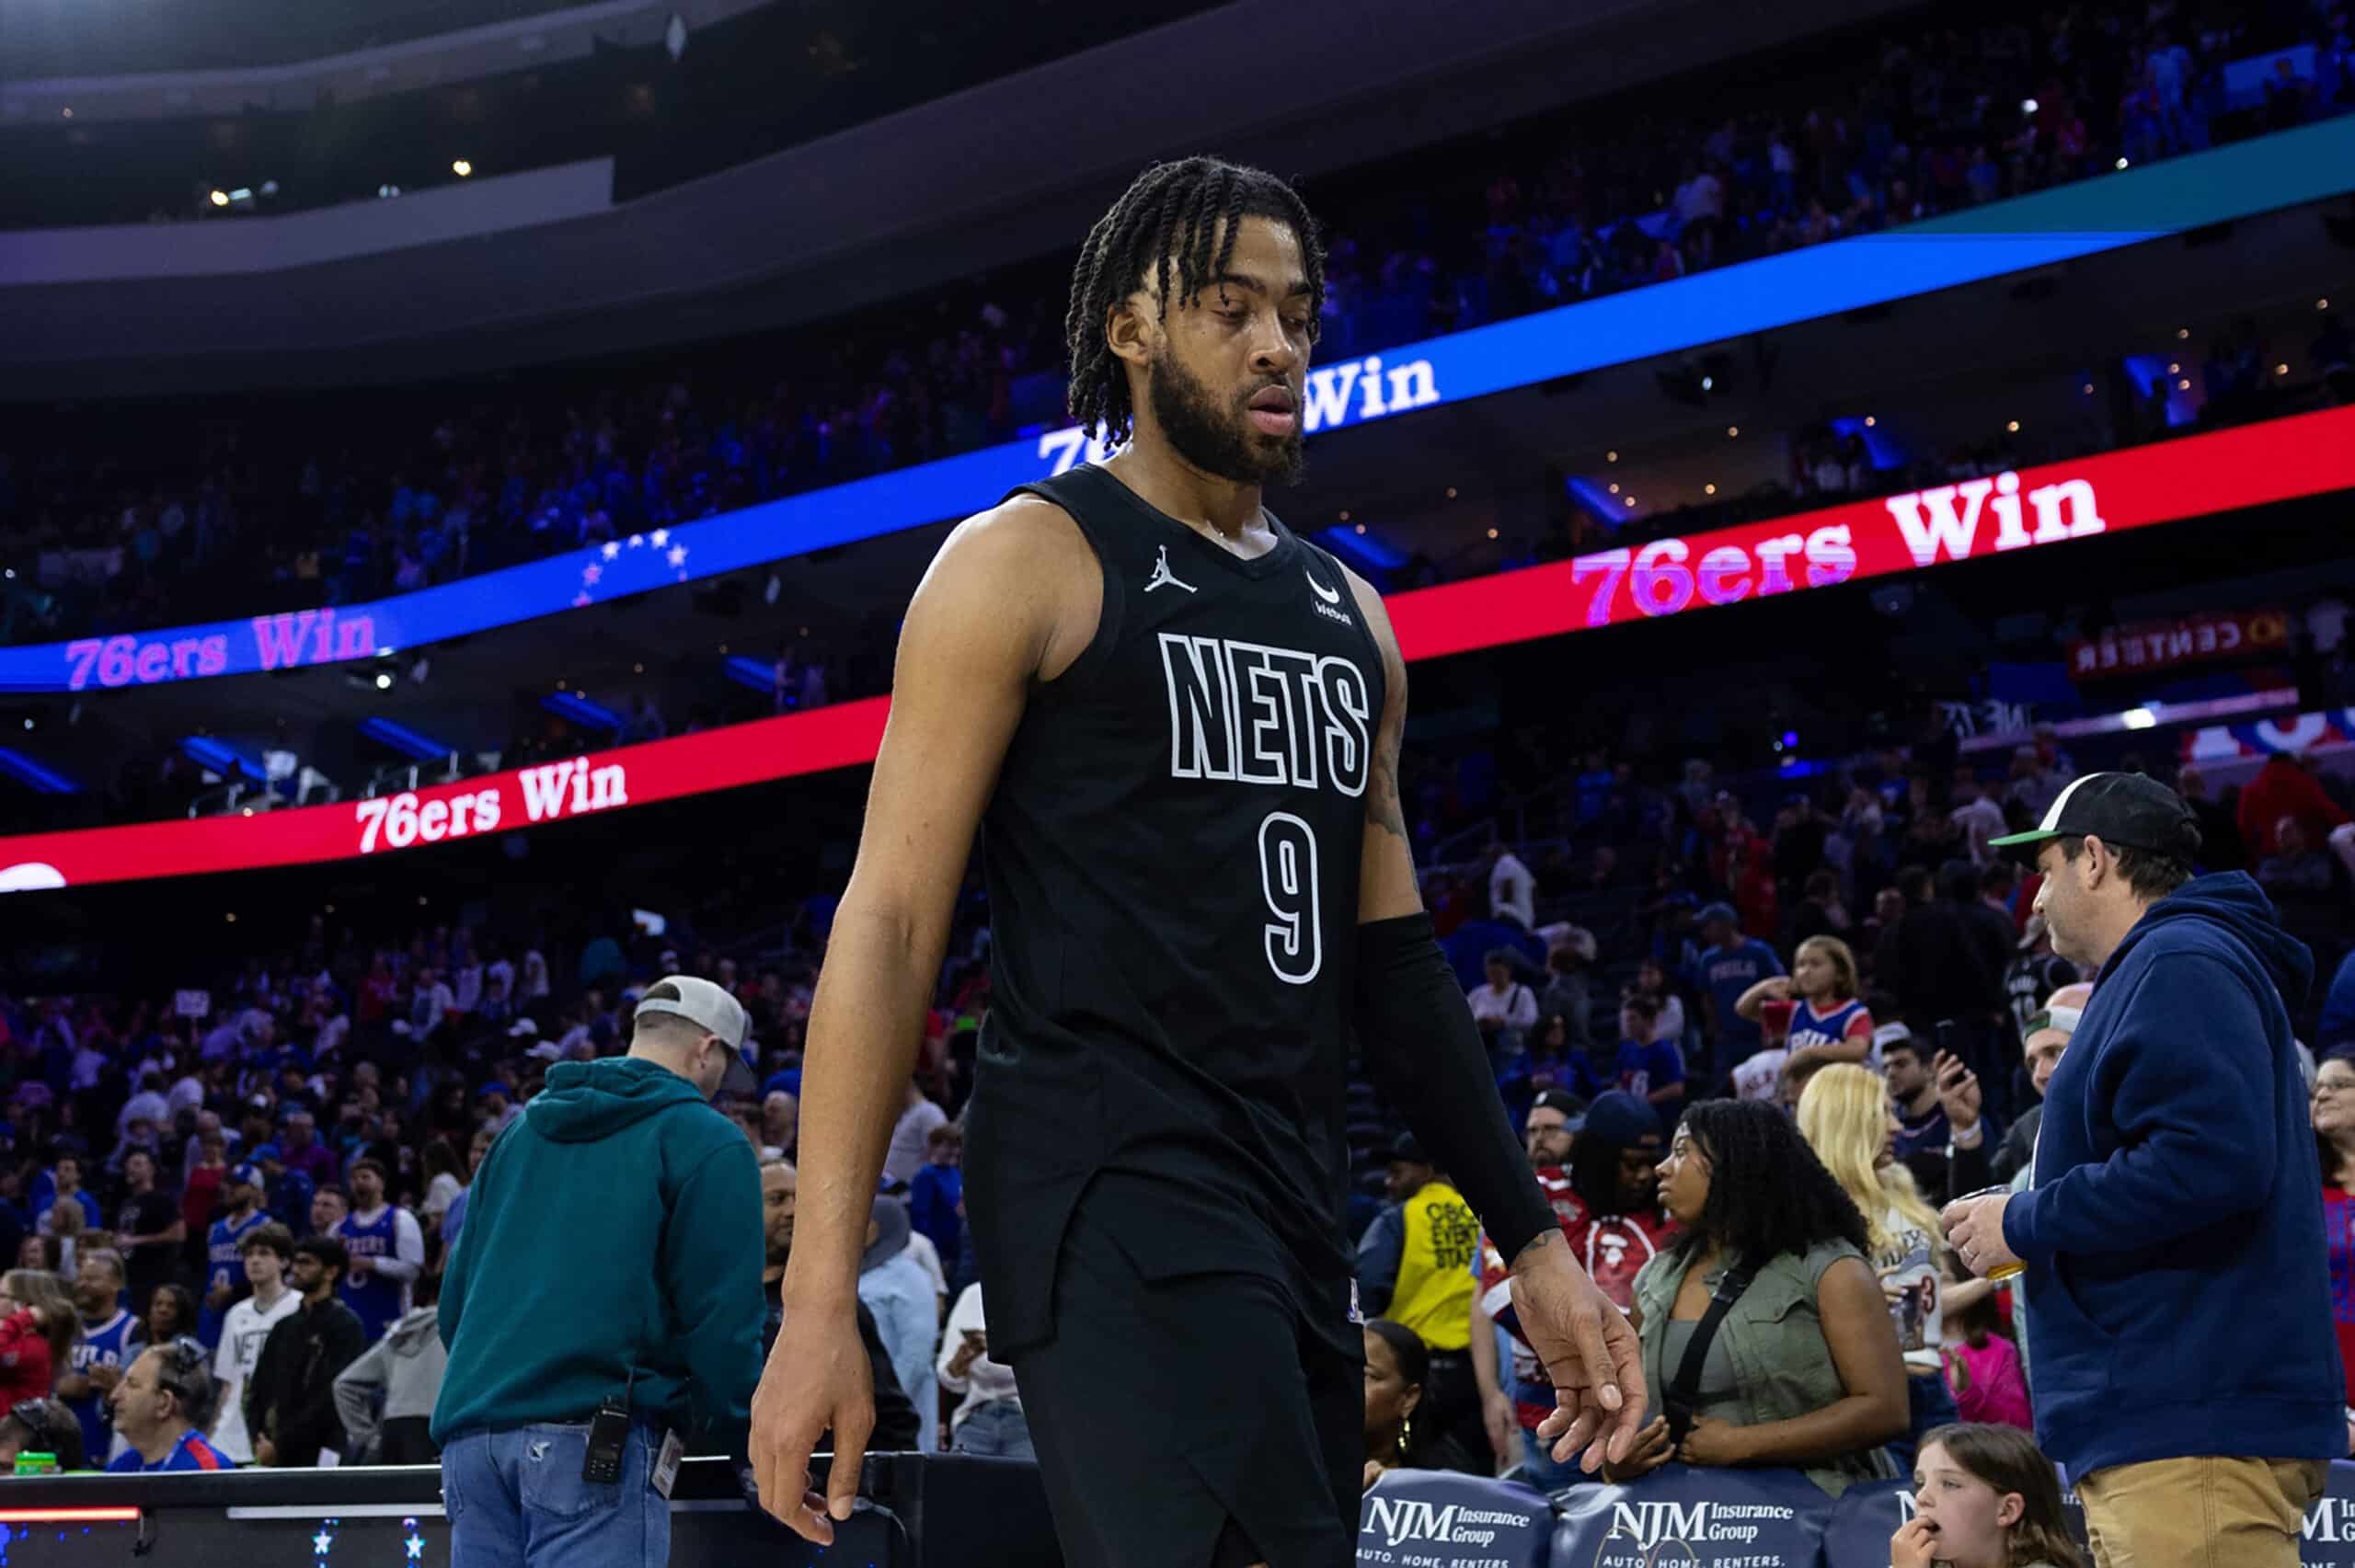 Brooklyn Nets forward Trendon Watford (9) walks off the court after a loss against the Philadelphia 76ers at Wells Fargo Center.